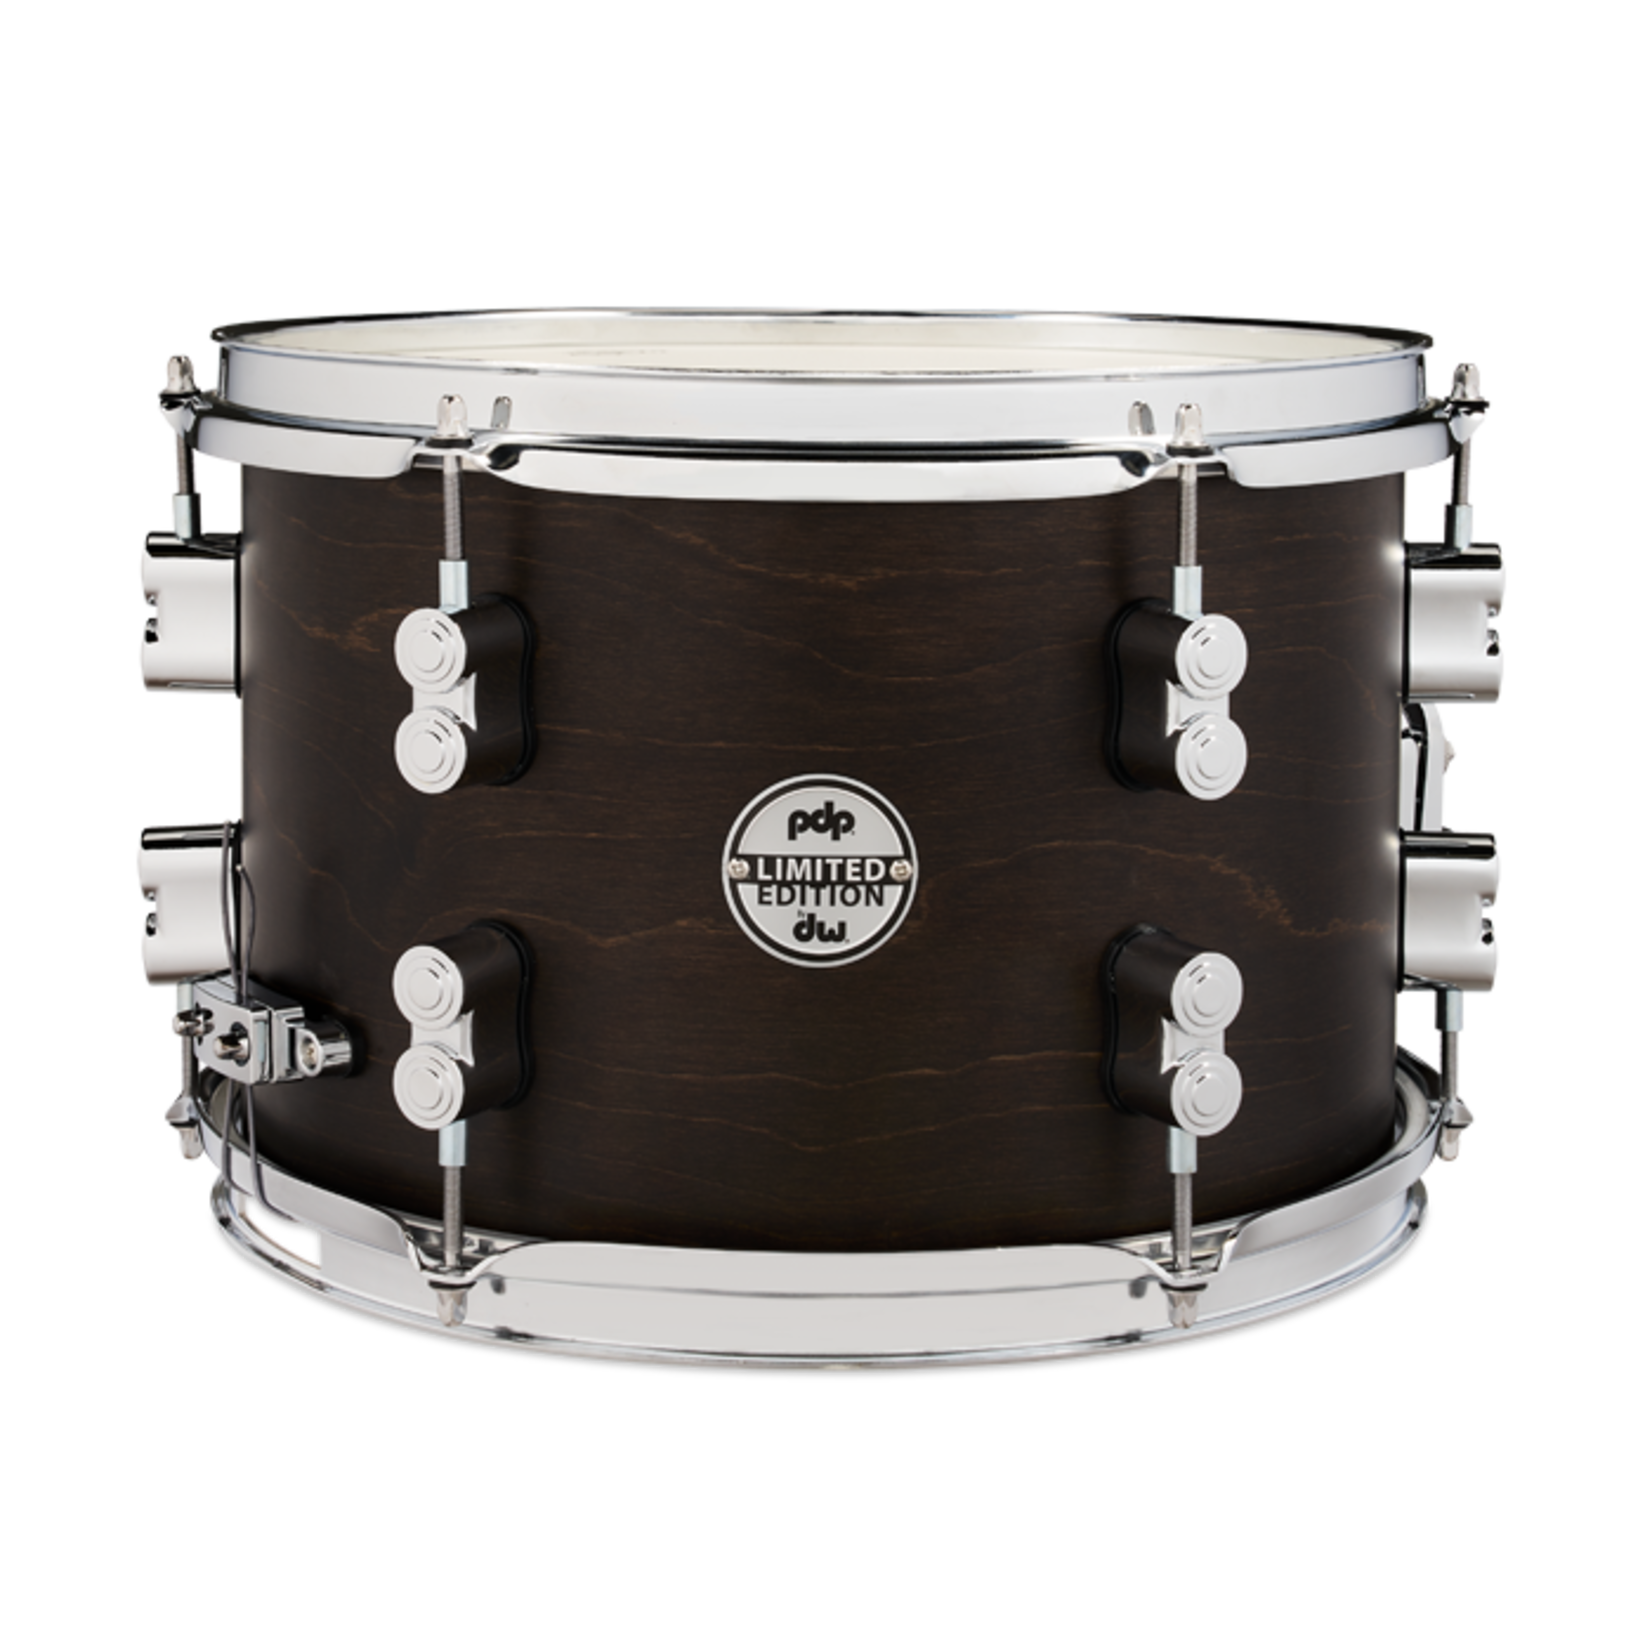 PDP PDP Concept Series 2023 Limited Edition Dry Maple 8x12" Snare Drum (Dark Walnut Finish)